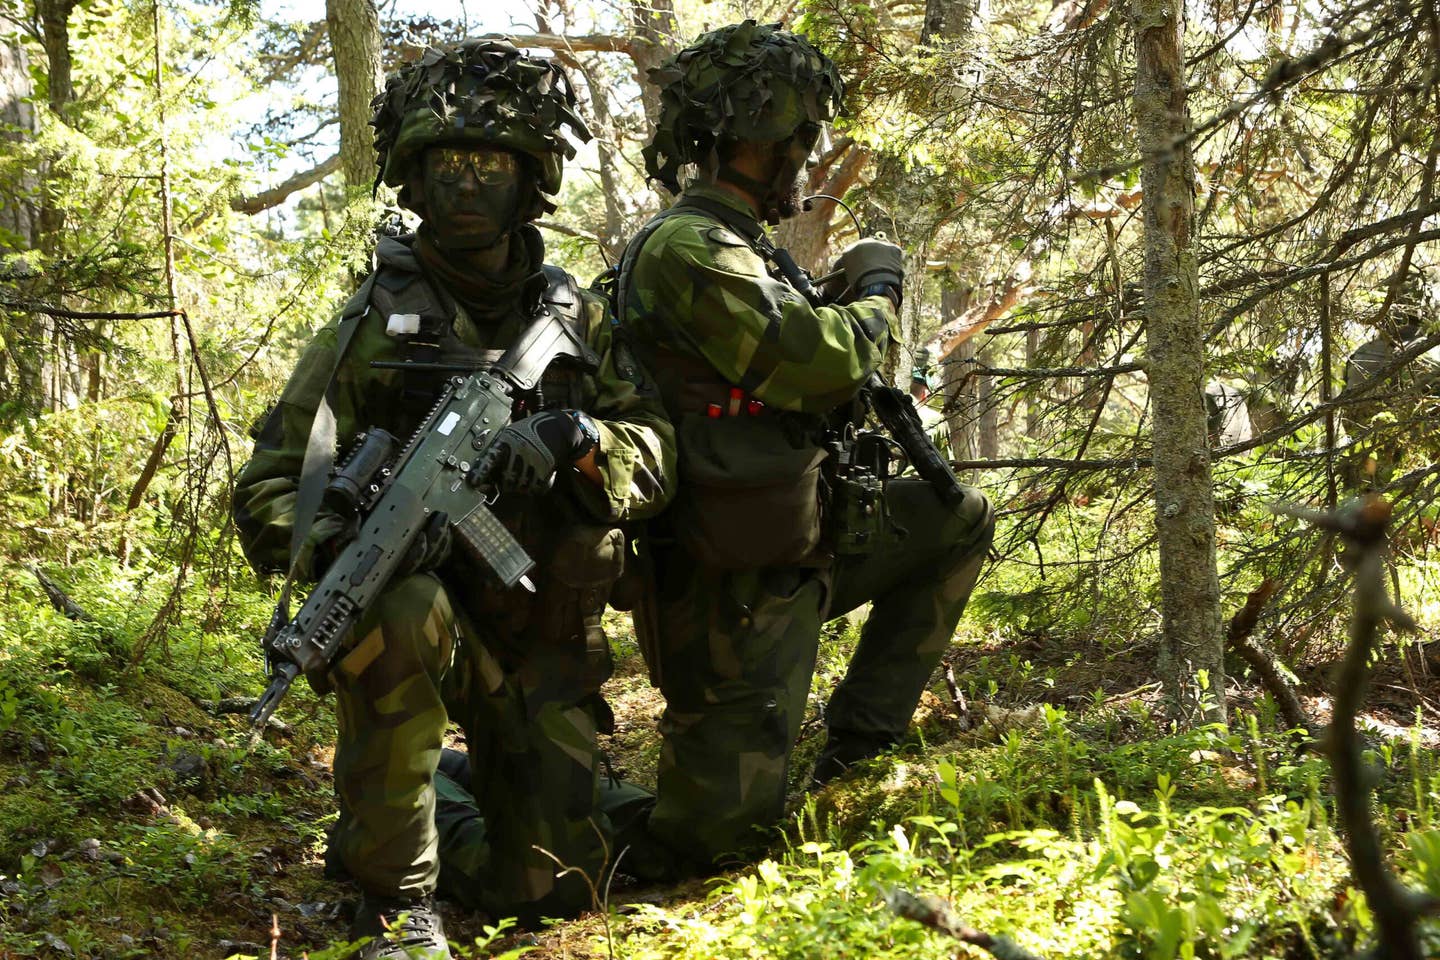 Swedish Marines on a reconnaissance exercise on the island of Uto, Sweden, armed with AK 5 assault rifles. <em>U.S. Navy photo by Mass Communication Specialist 1st Class America A. Henry/ Released</em>